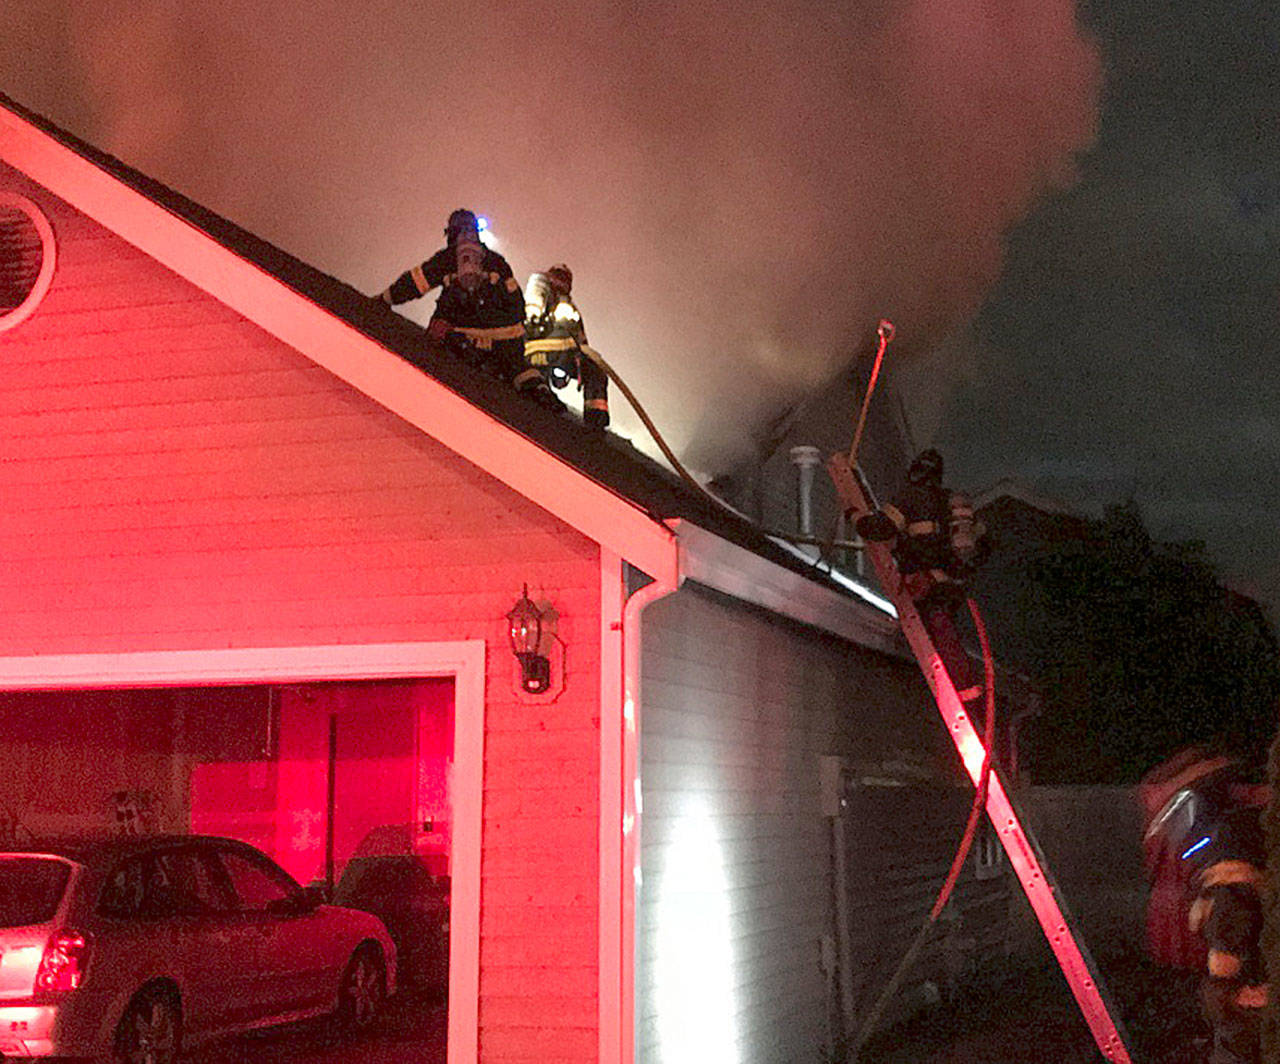 Firefighters tackle a house fire early Thursday morning in the 13300 block of Southeast 263rd Place. COURTESY PHOTO, Puget Sound Fire